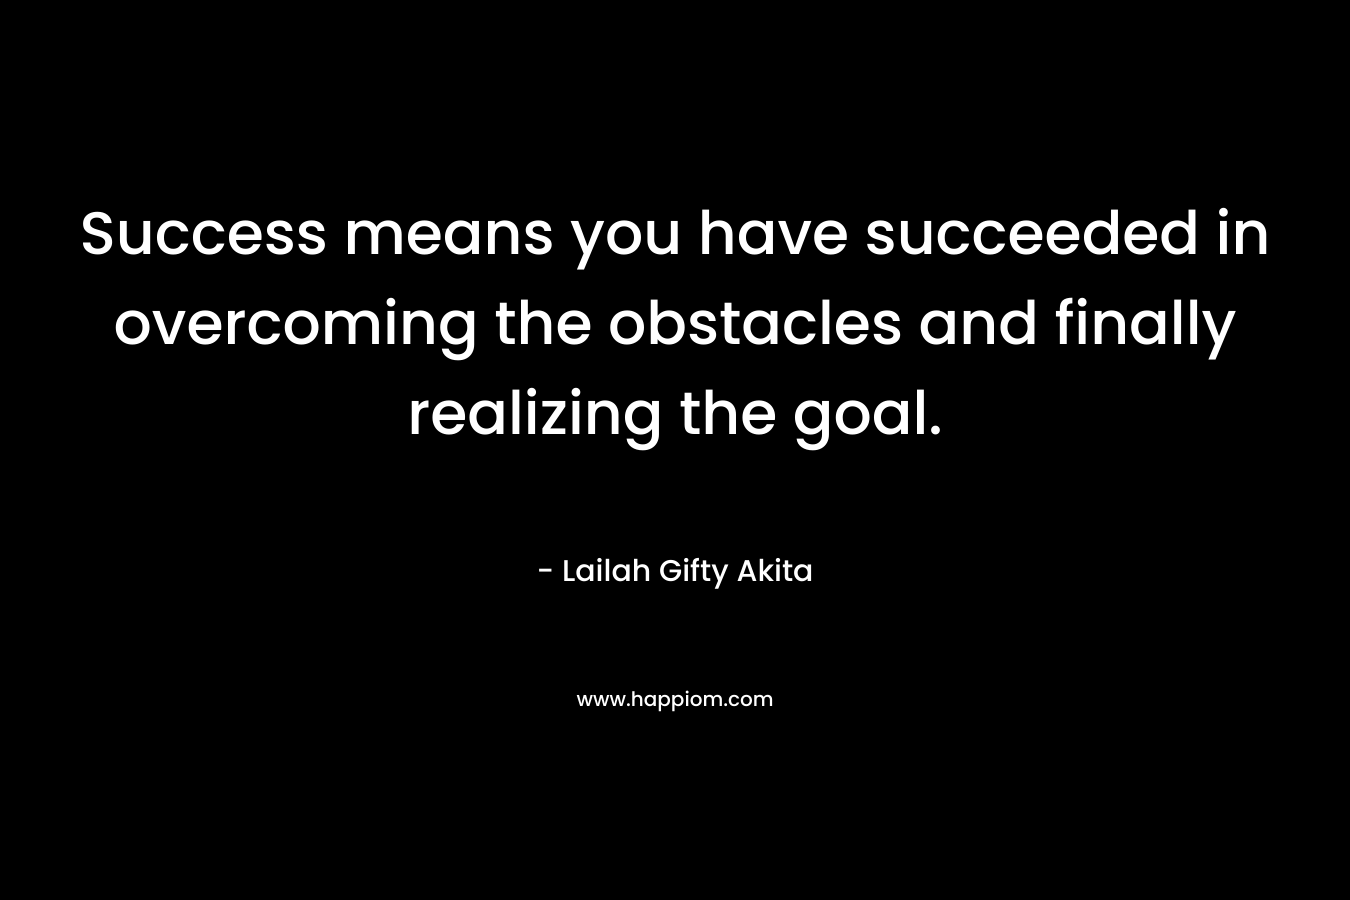 Success means you have succeeded in overcoming the obstacles and finally realizing the goal.